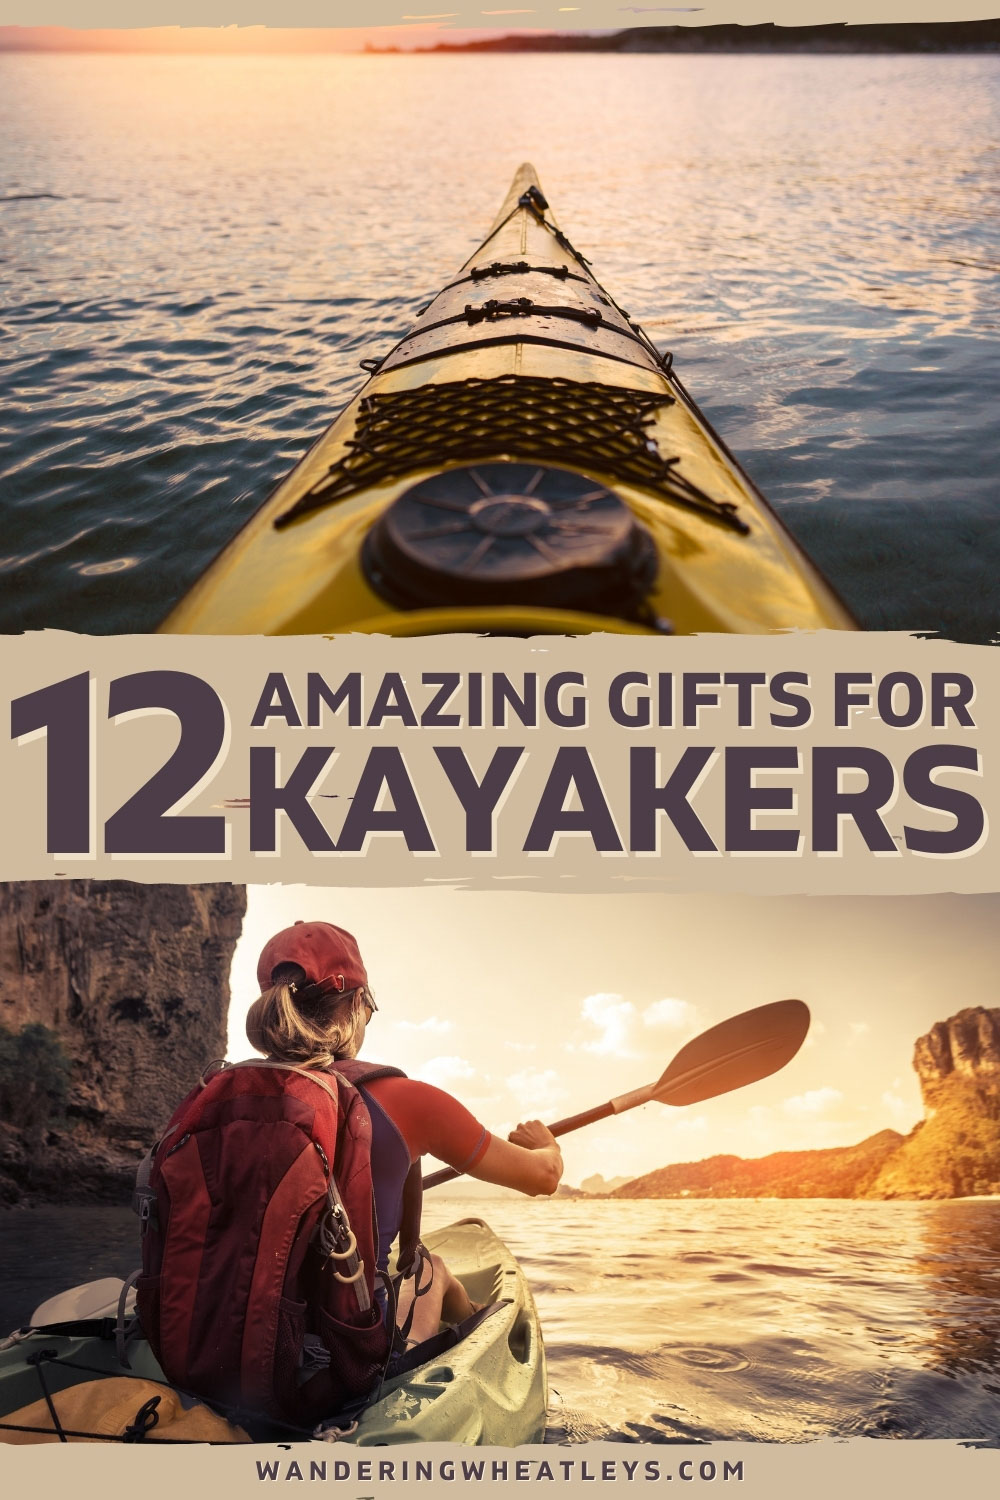 12 Awesome Gift Ideas for Avid Kayakers – Wandering Wheatleys